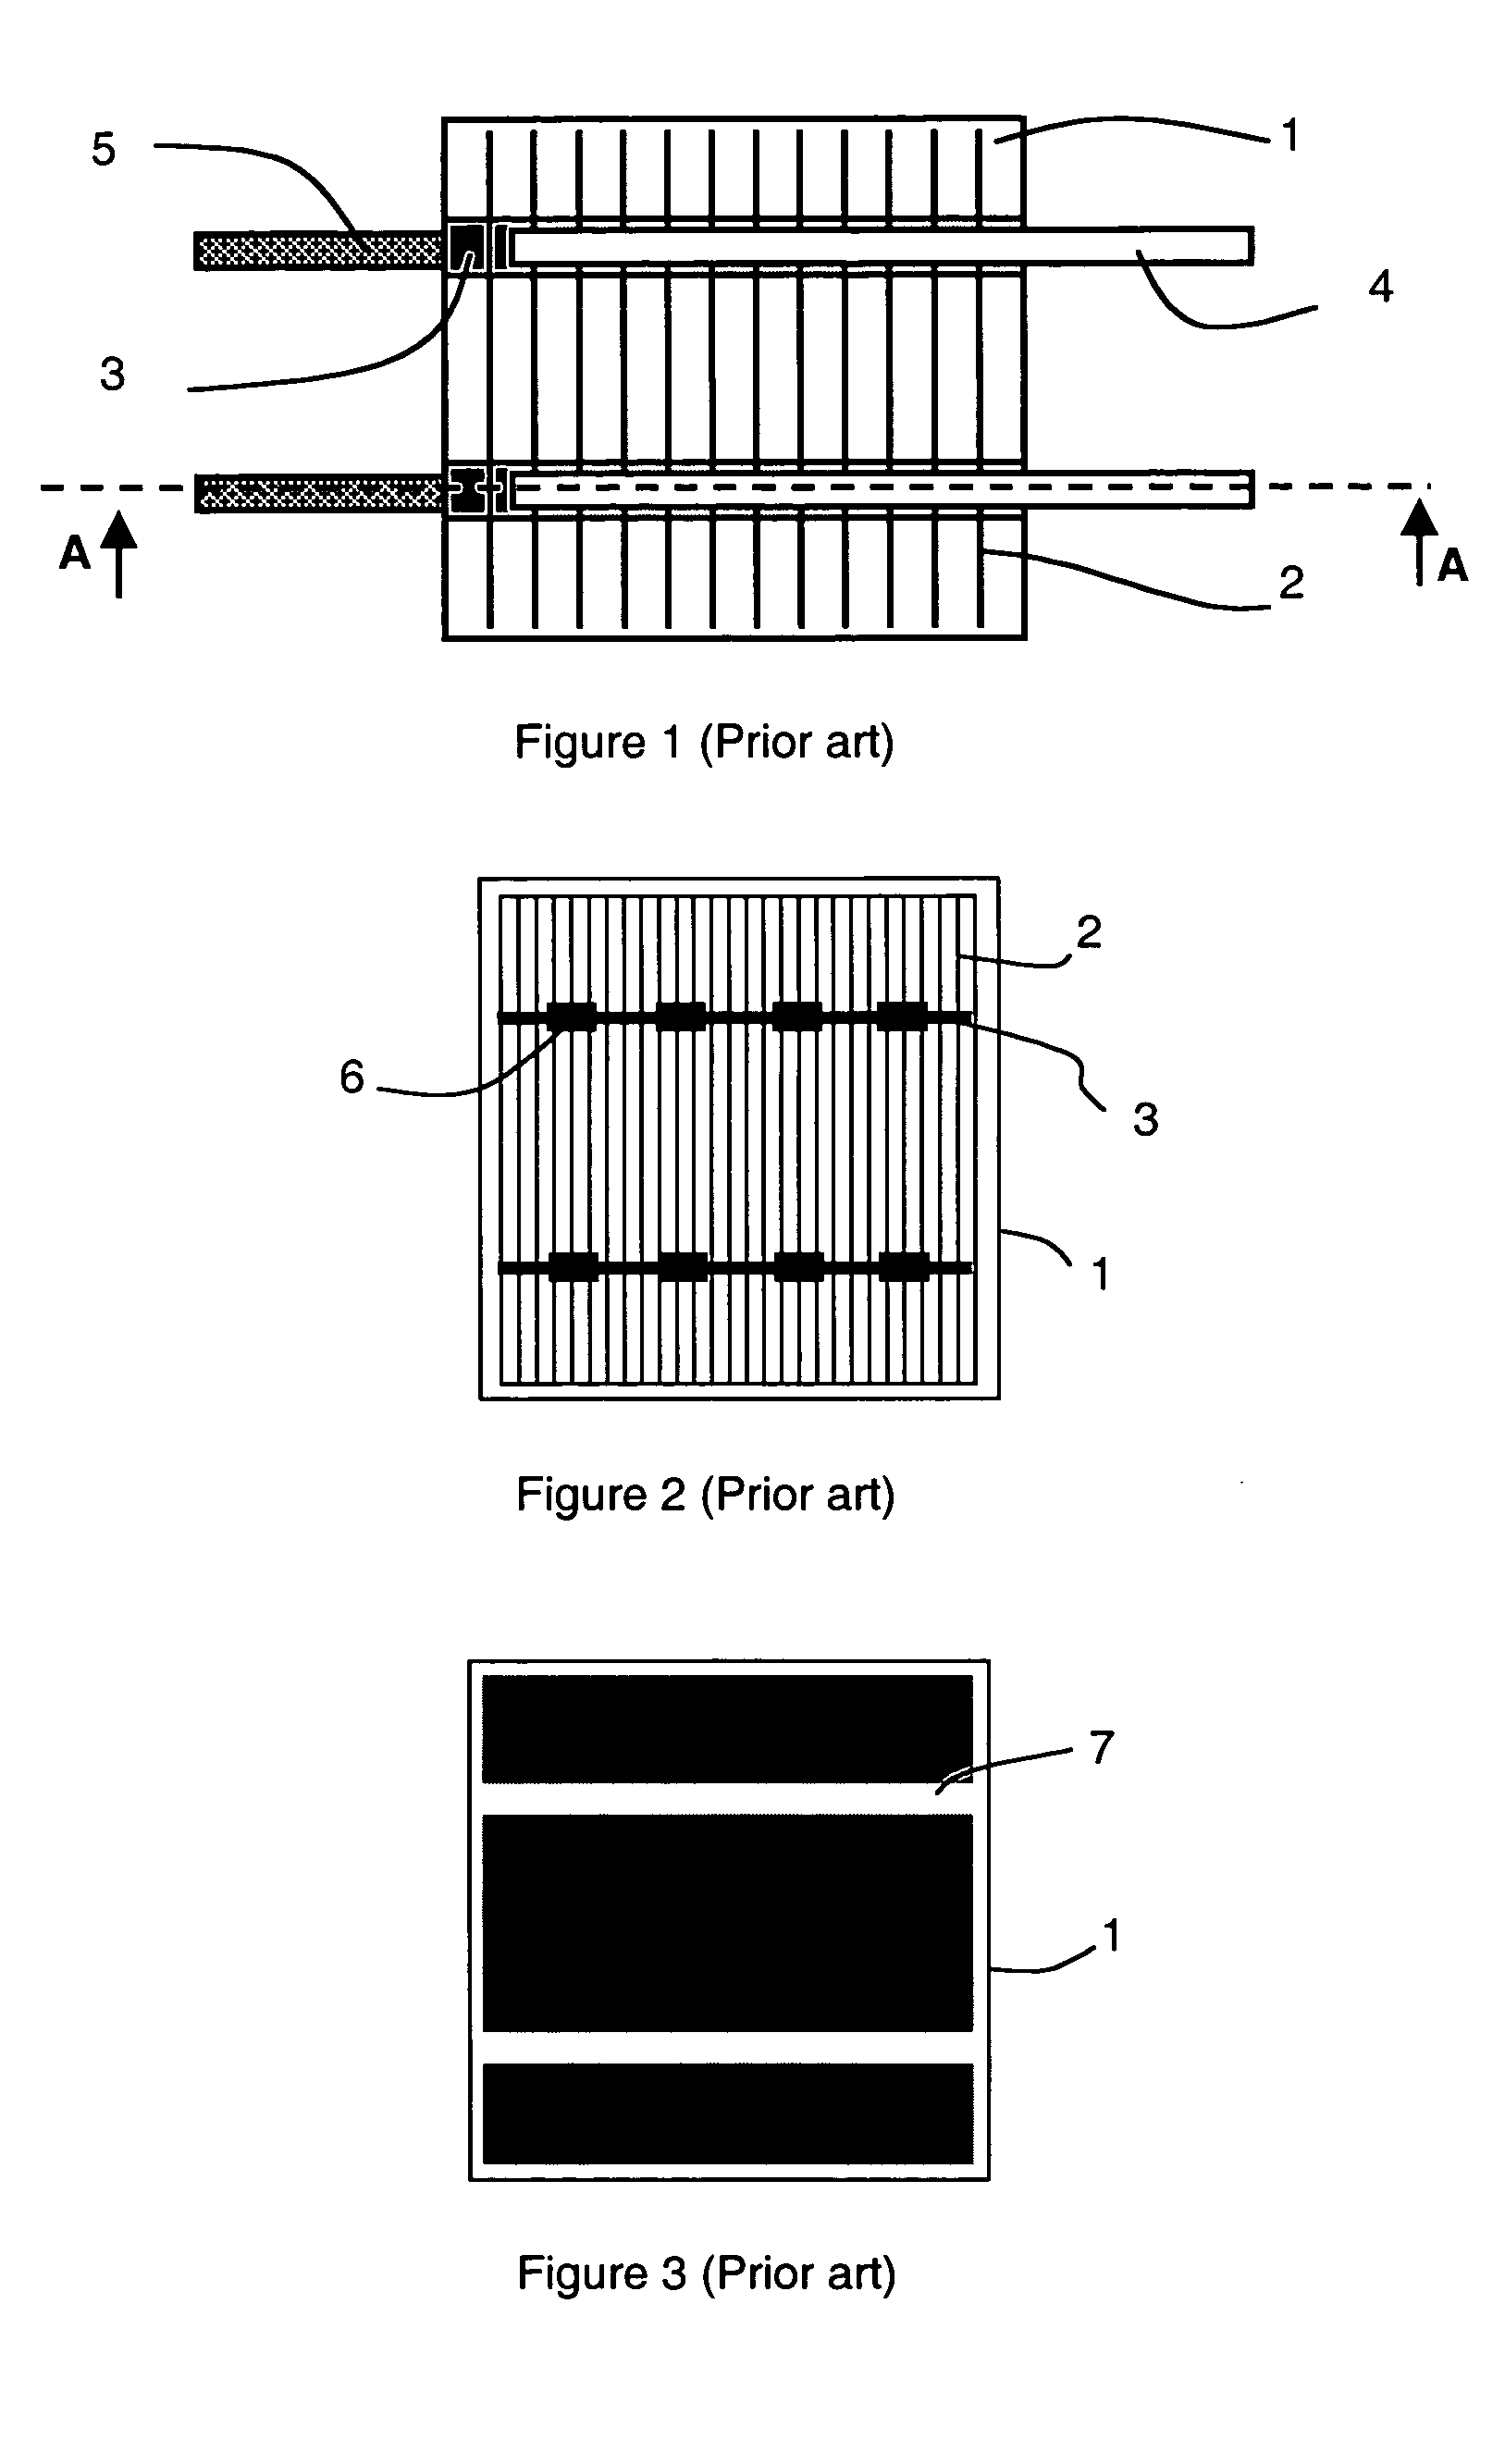 Photovoltaic cell assembly and the method of producing one such assembly